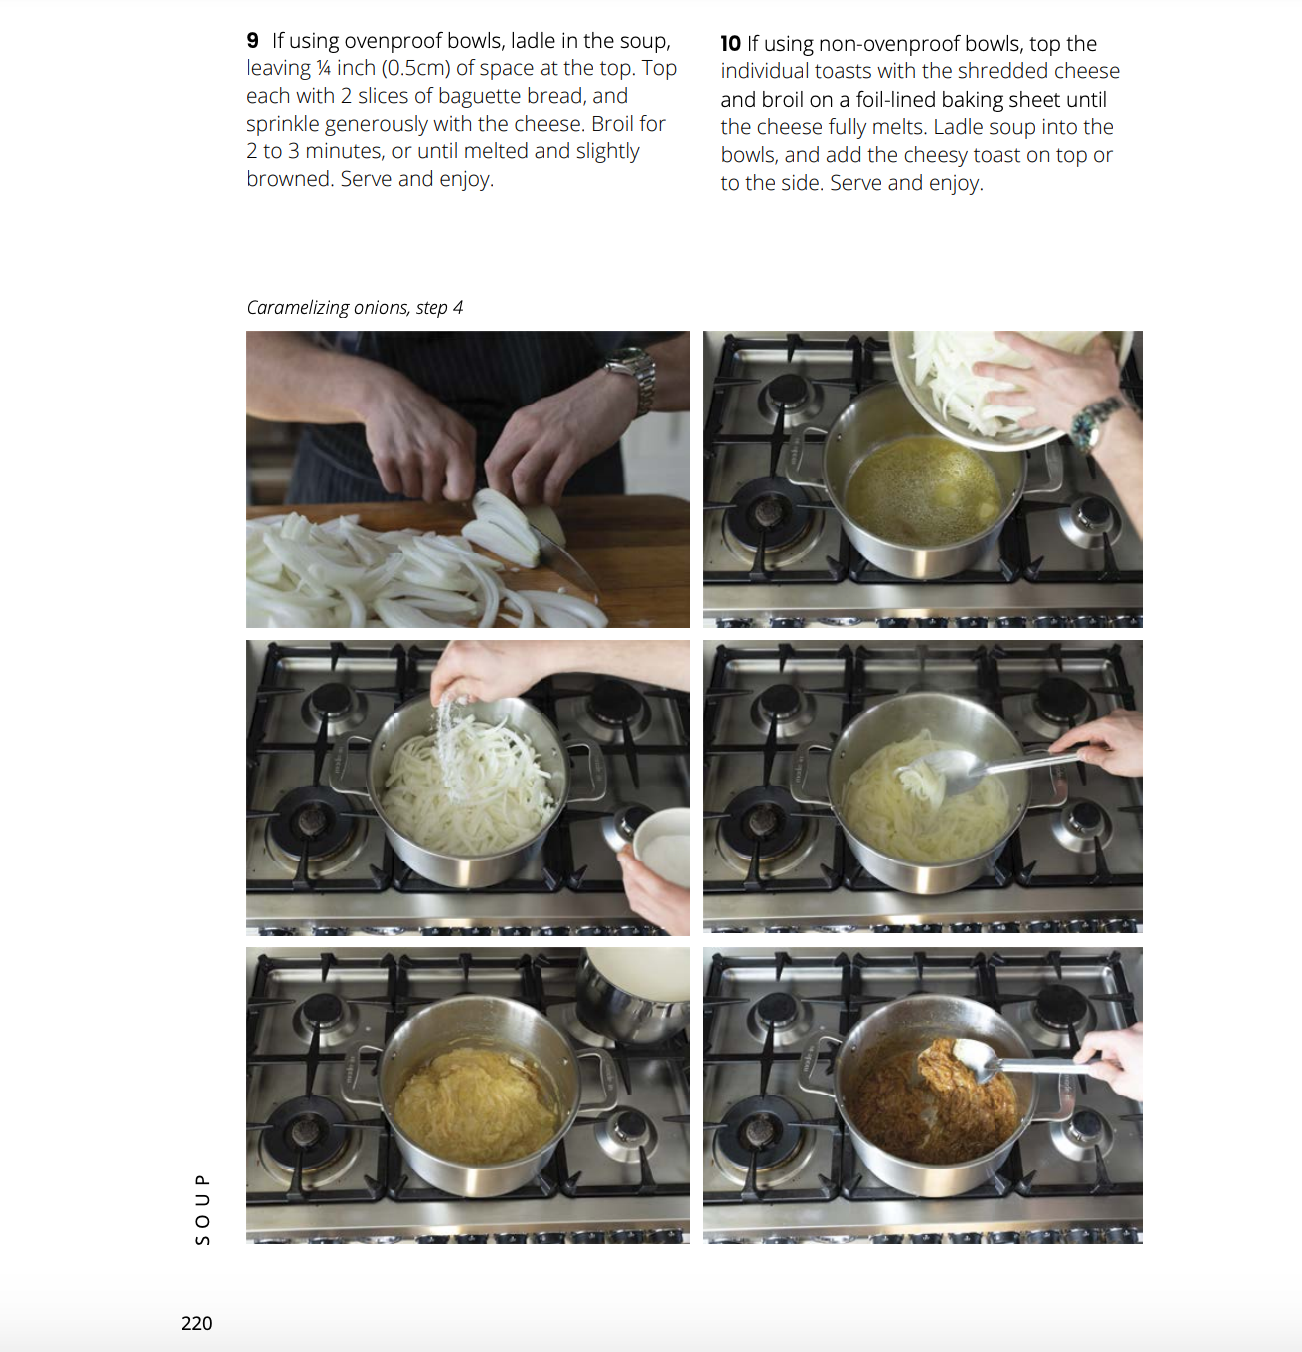 French Onion Soup recipe page 2